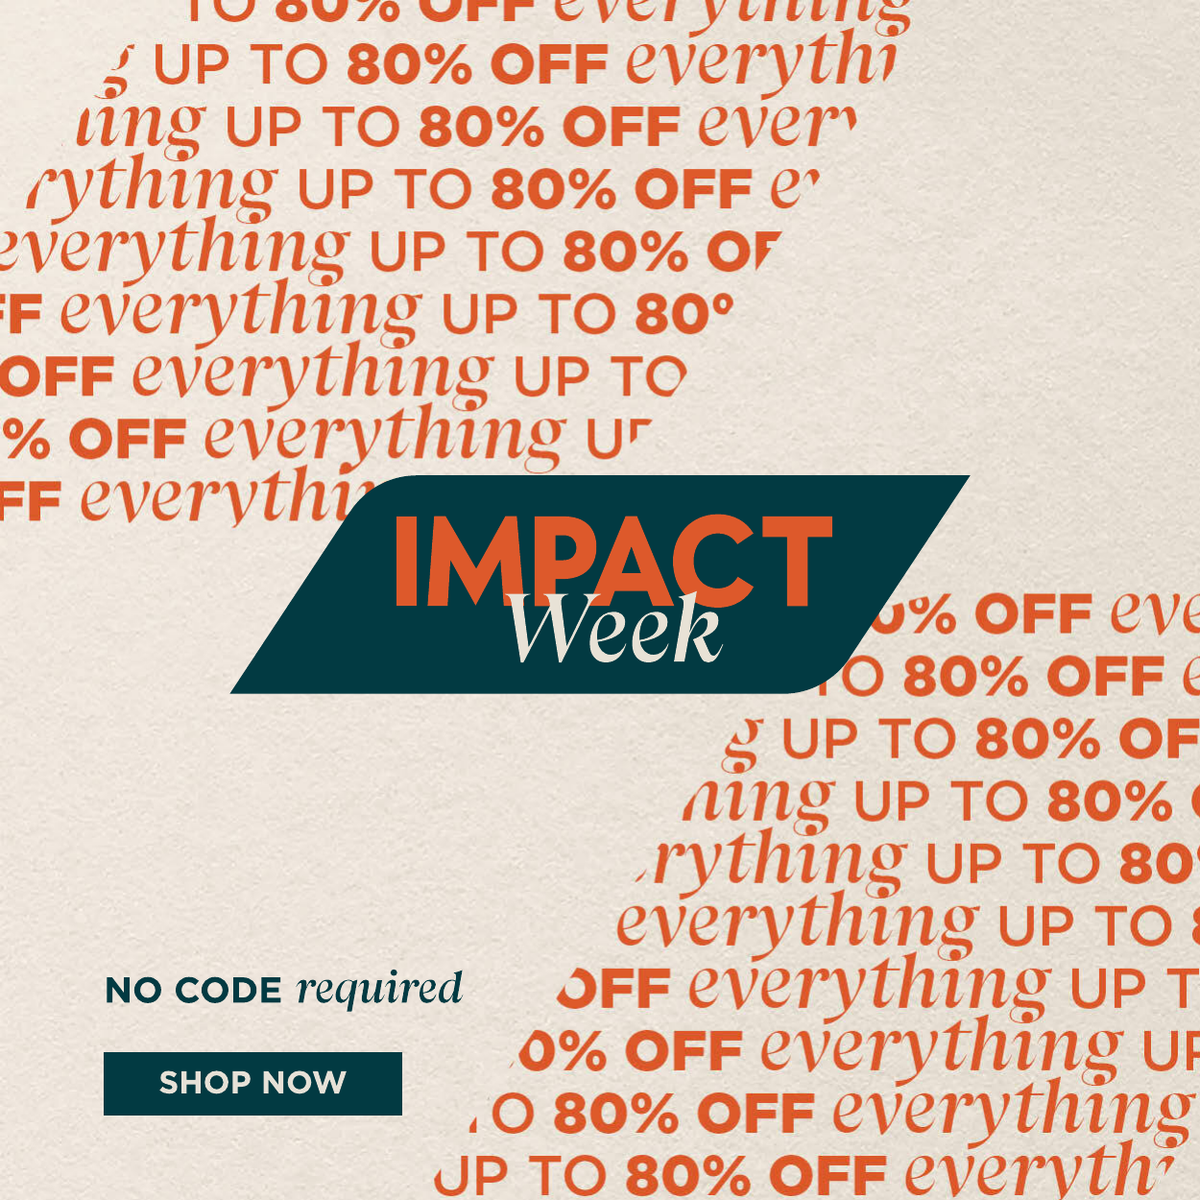 Impact Week Sale. Up to 80% off. No code required. shop now.